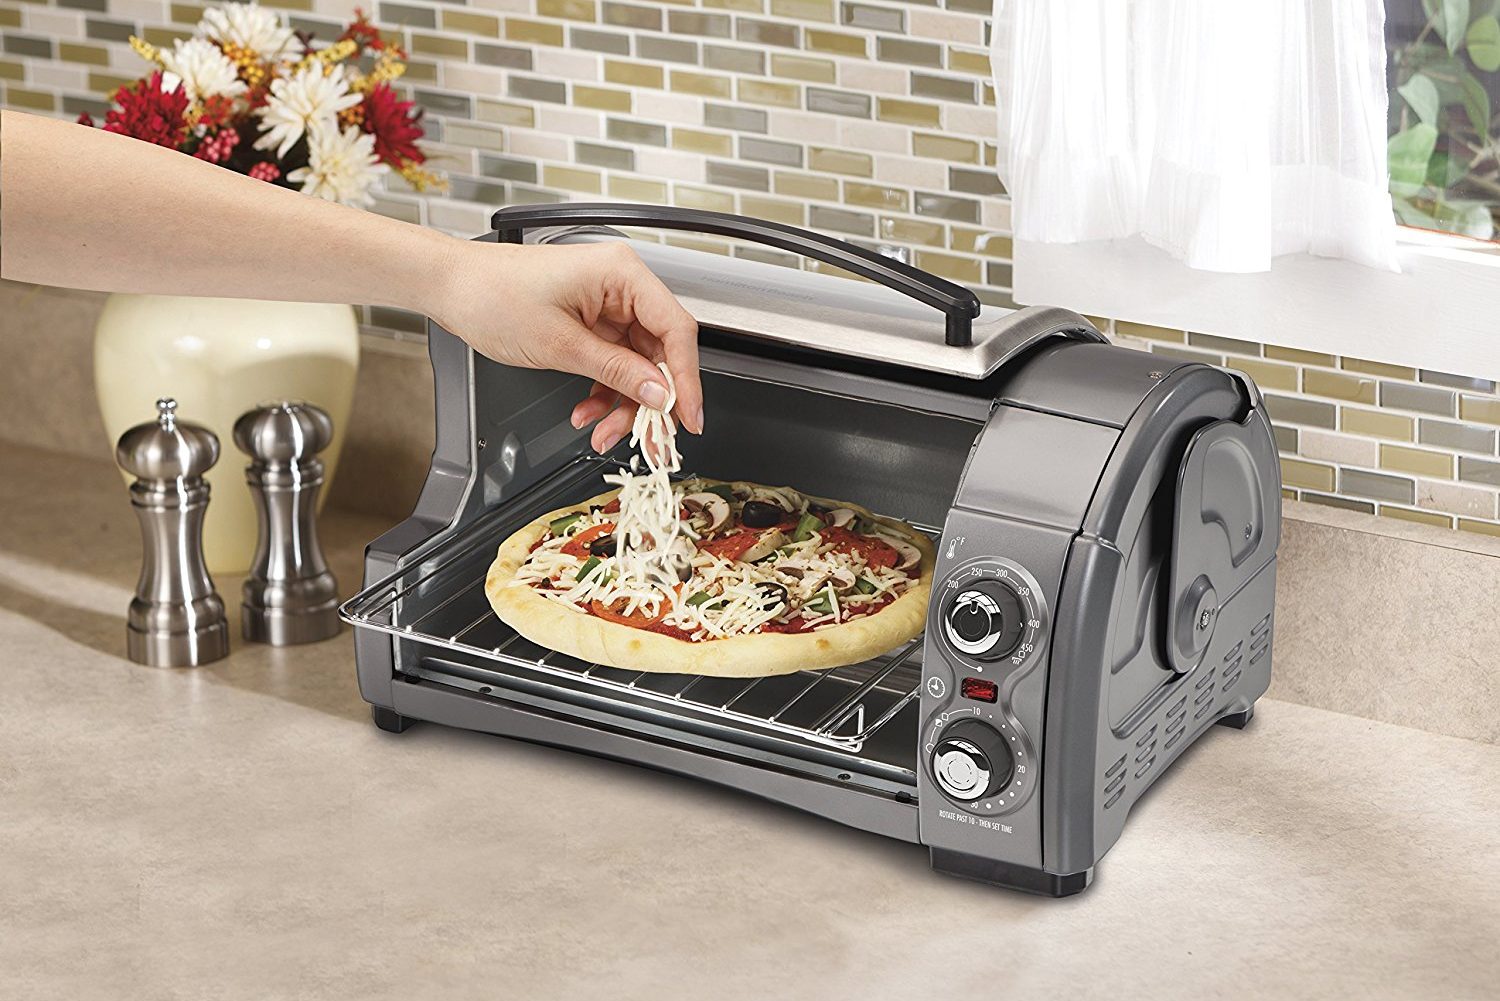 Hamilton Beach Toaster Oven and Pizza Maker Down to $27.88!